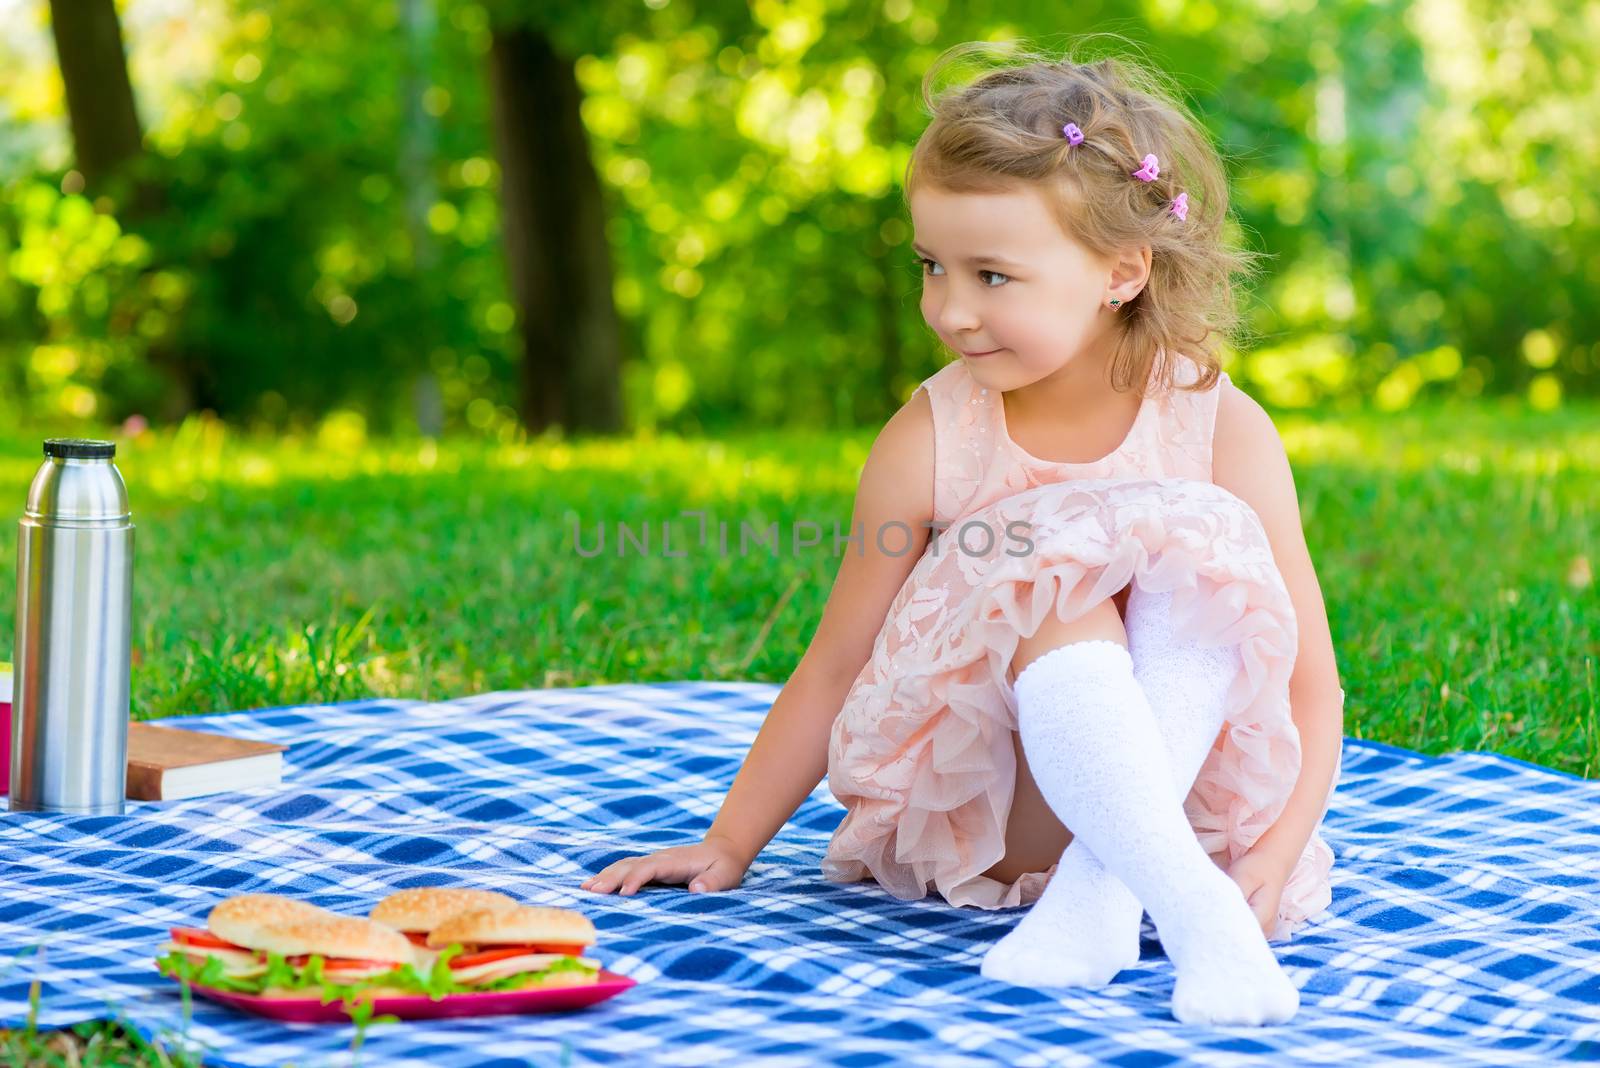 beautiful girl 6 years old sitting on the plaid in the park by kosmsos111